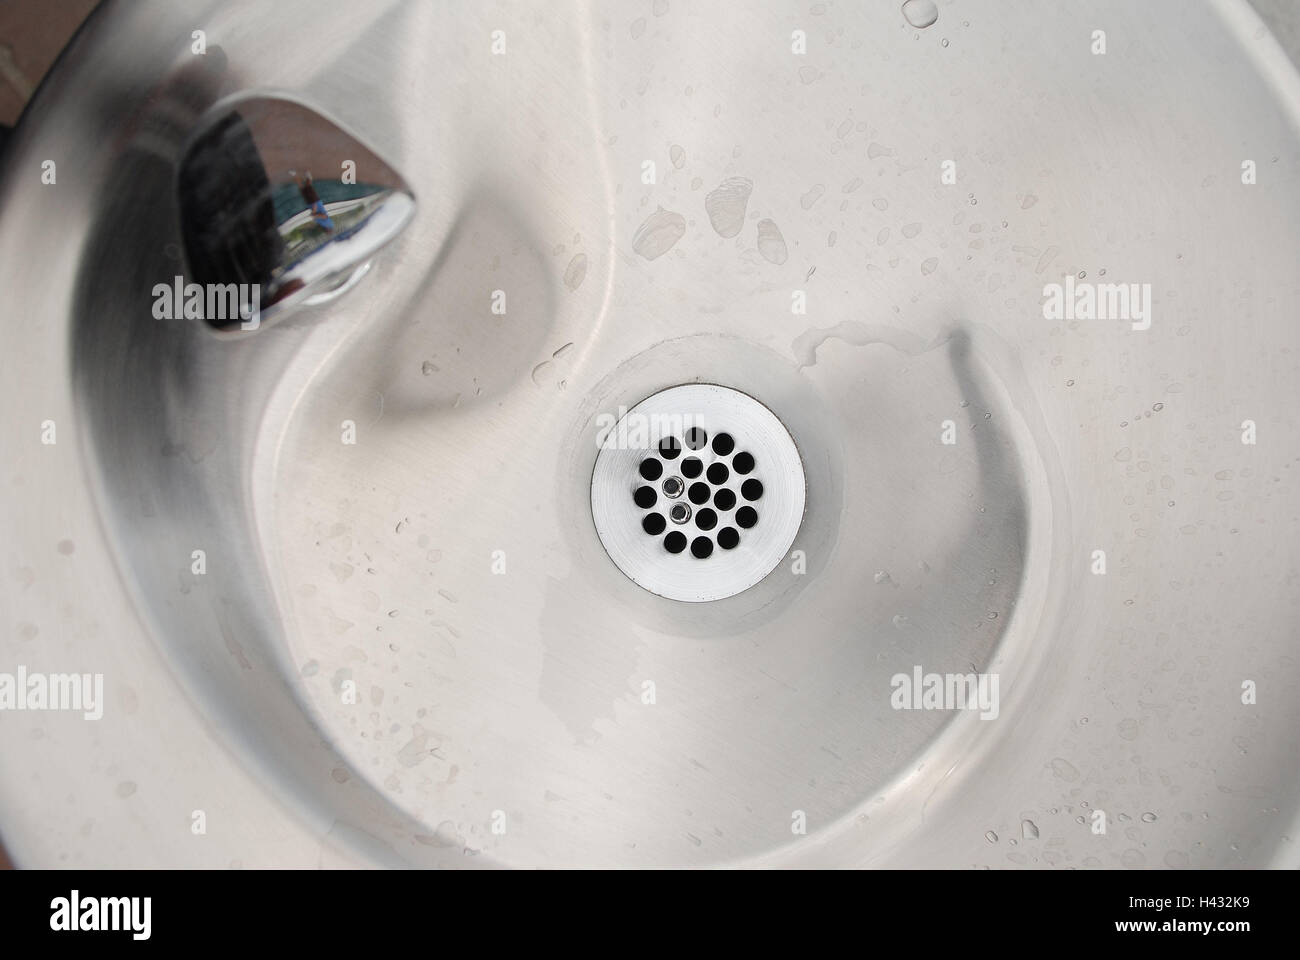 Sinks, detail, drain, wet, from above, stainless steel cymbals, stainless steel sinks, sink, sink, sieve, drain sieve, drop water, drop, moisture, humidity, icon, wash away, blank, Stock Photo